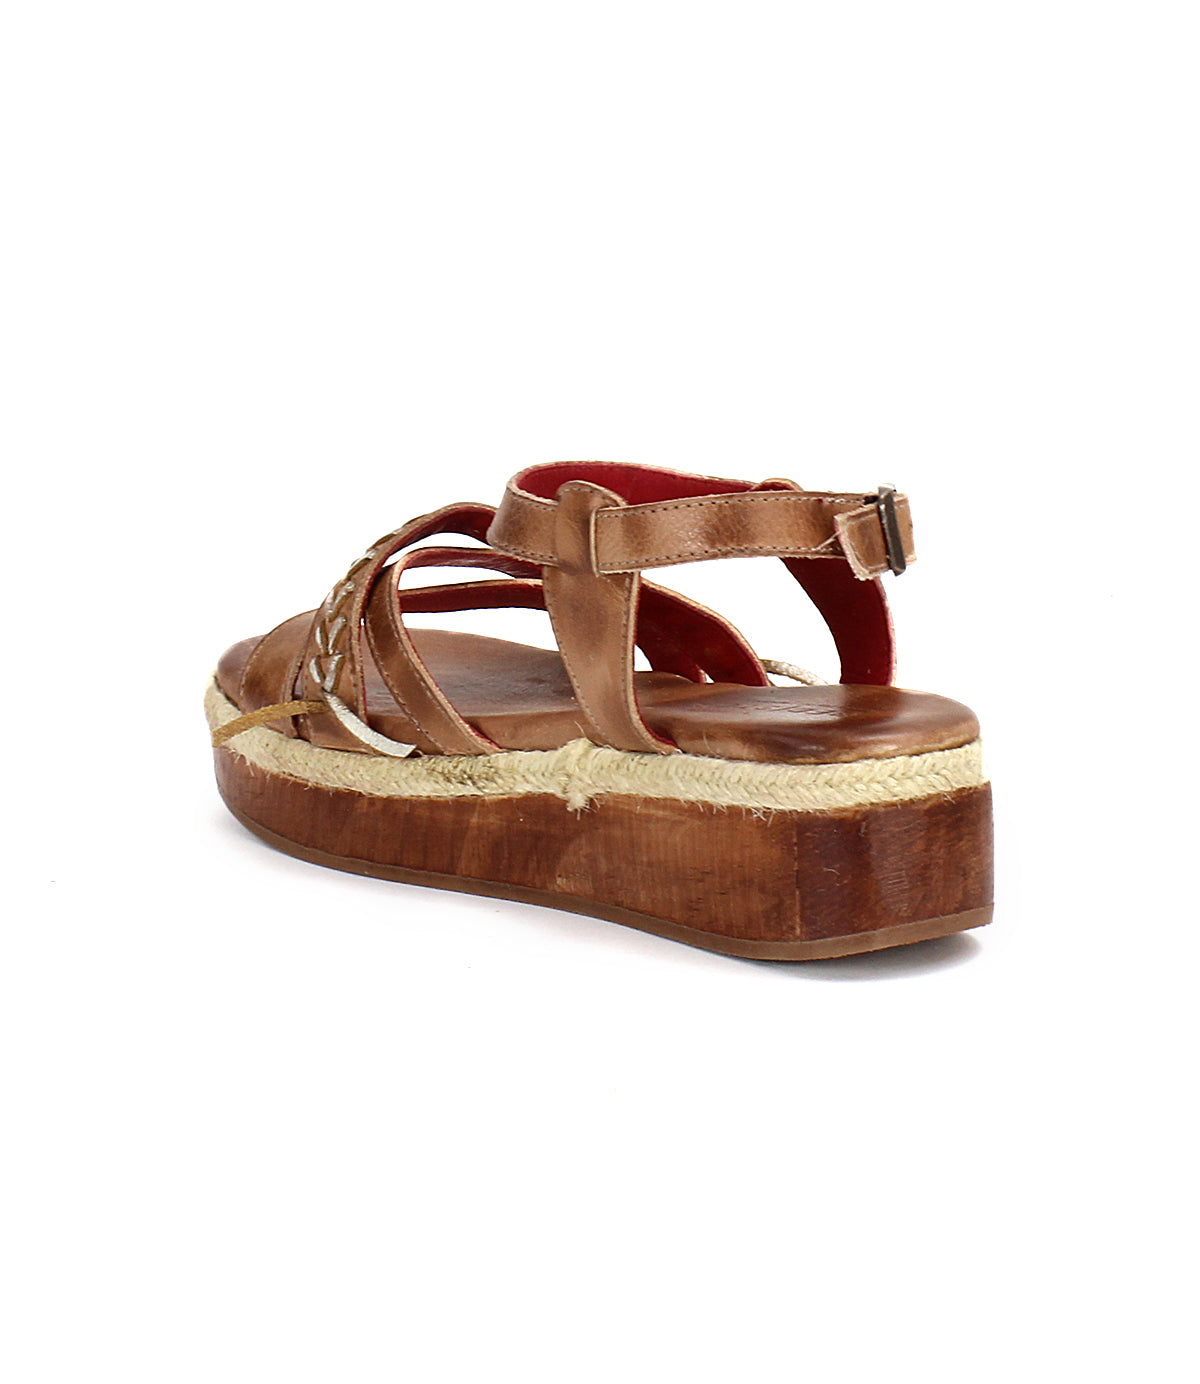 Brown strappy sandal with a chunky wooden flatform sole, Necessary by Bed Stu.